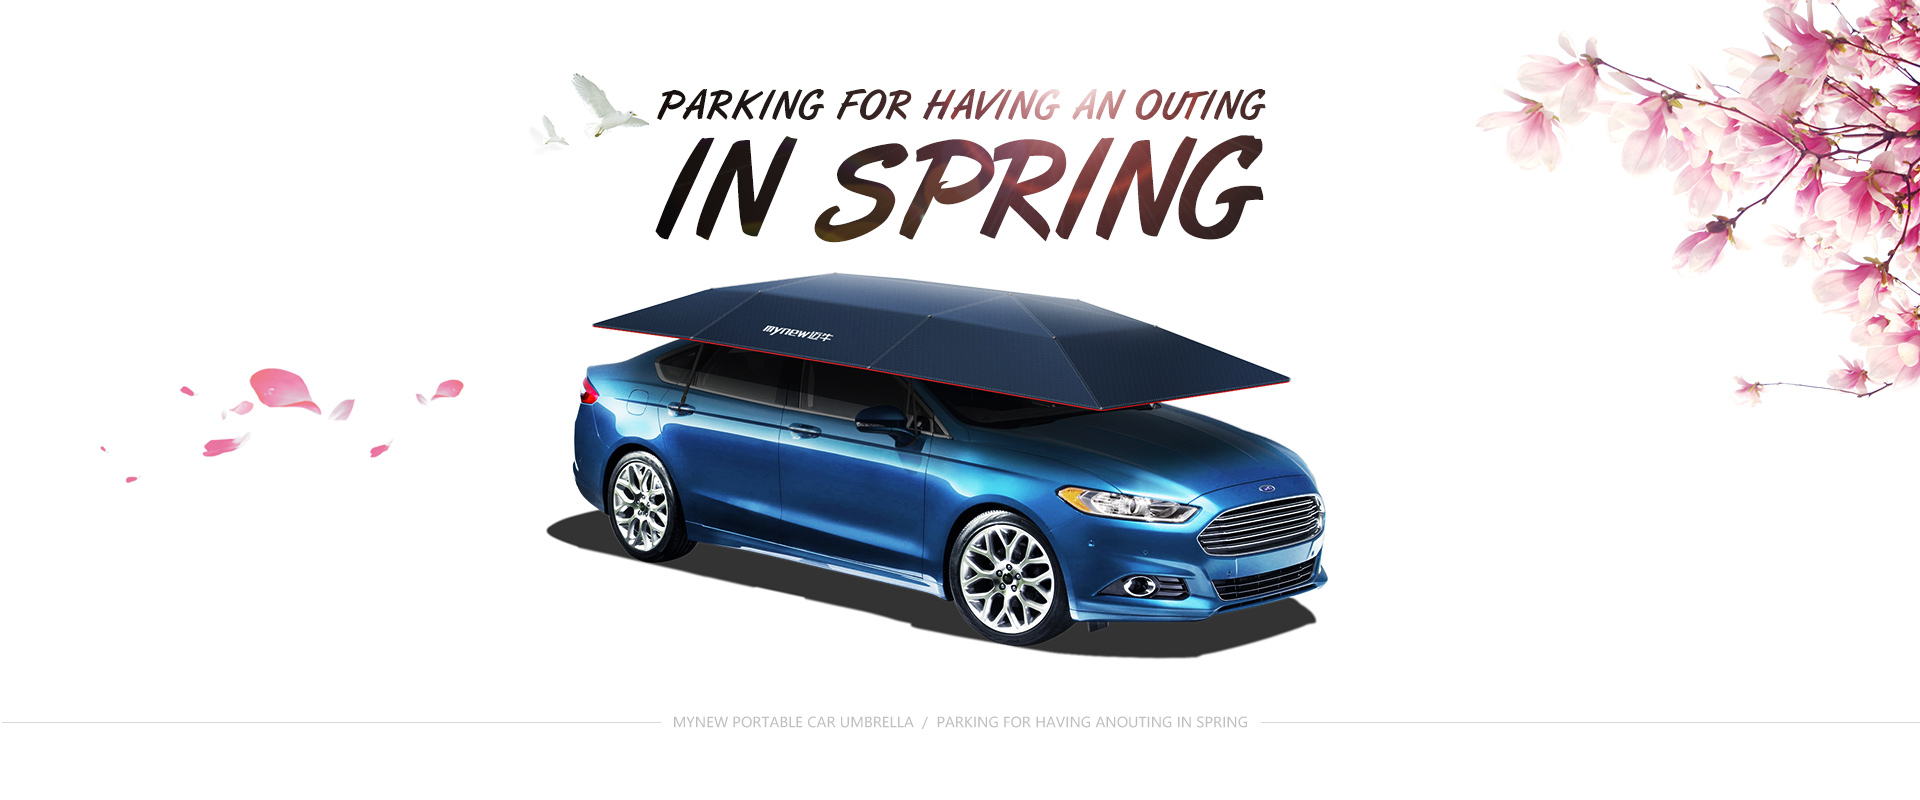 Parking-for-having-an-outing-in-spring